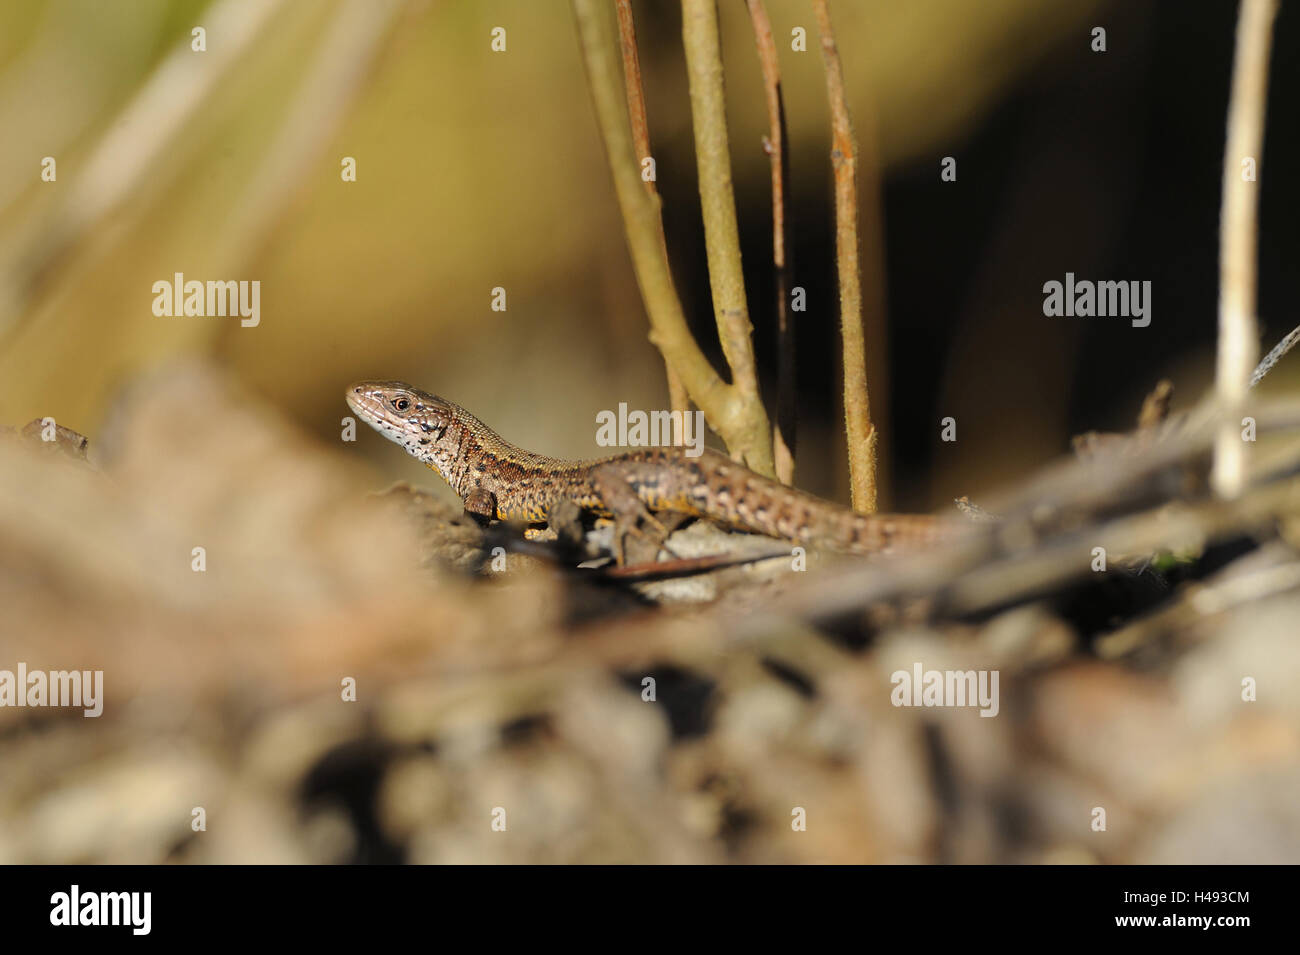 Forest lizard, female, medium close-up, mountain lizard, Moore's lizard, lizard, Schuppenkriechtier, reptile, nature, animal, animal world, whole body, wood, forest floor, forks, quickly, fast, camouflage, conversion, colour change, changeably, saurian, Stock Photo